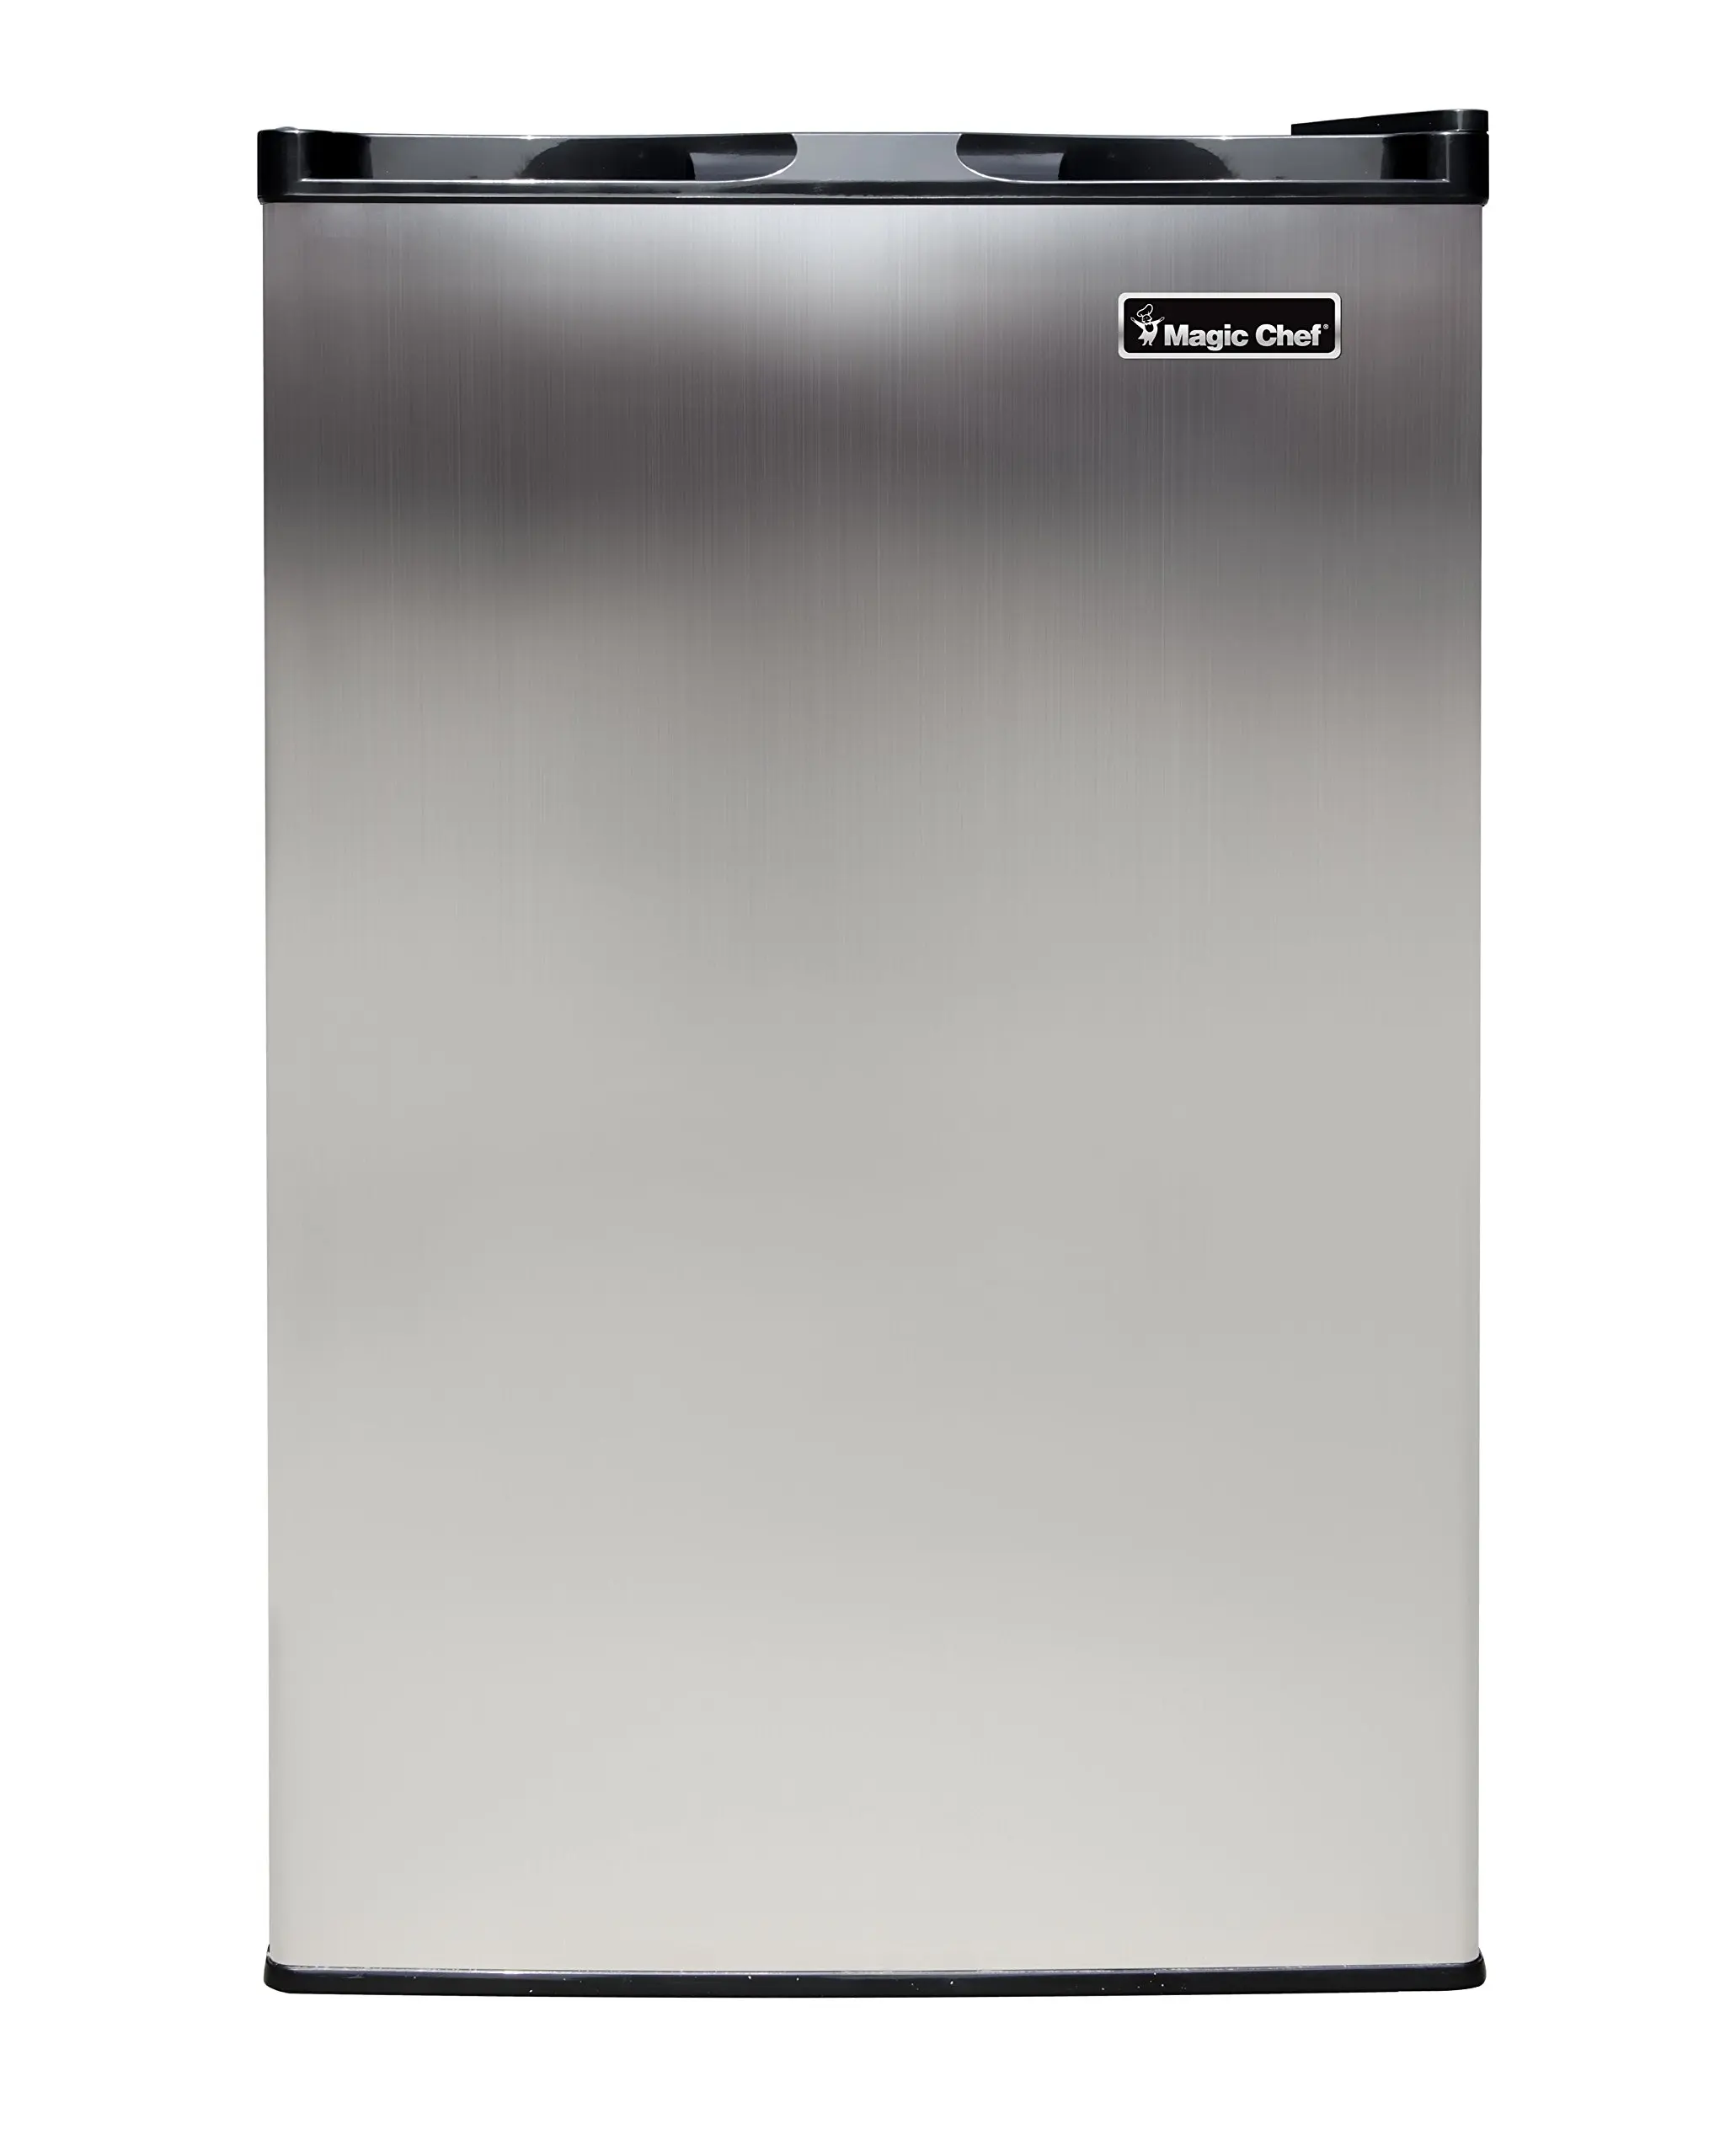 fridgdare 20 cuft stainless steel upright zer